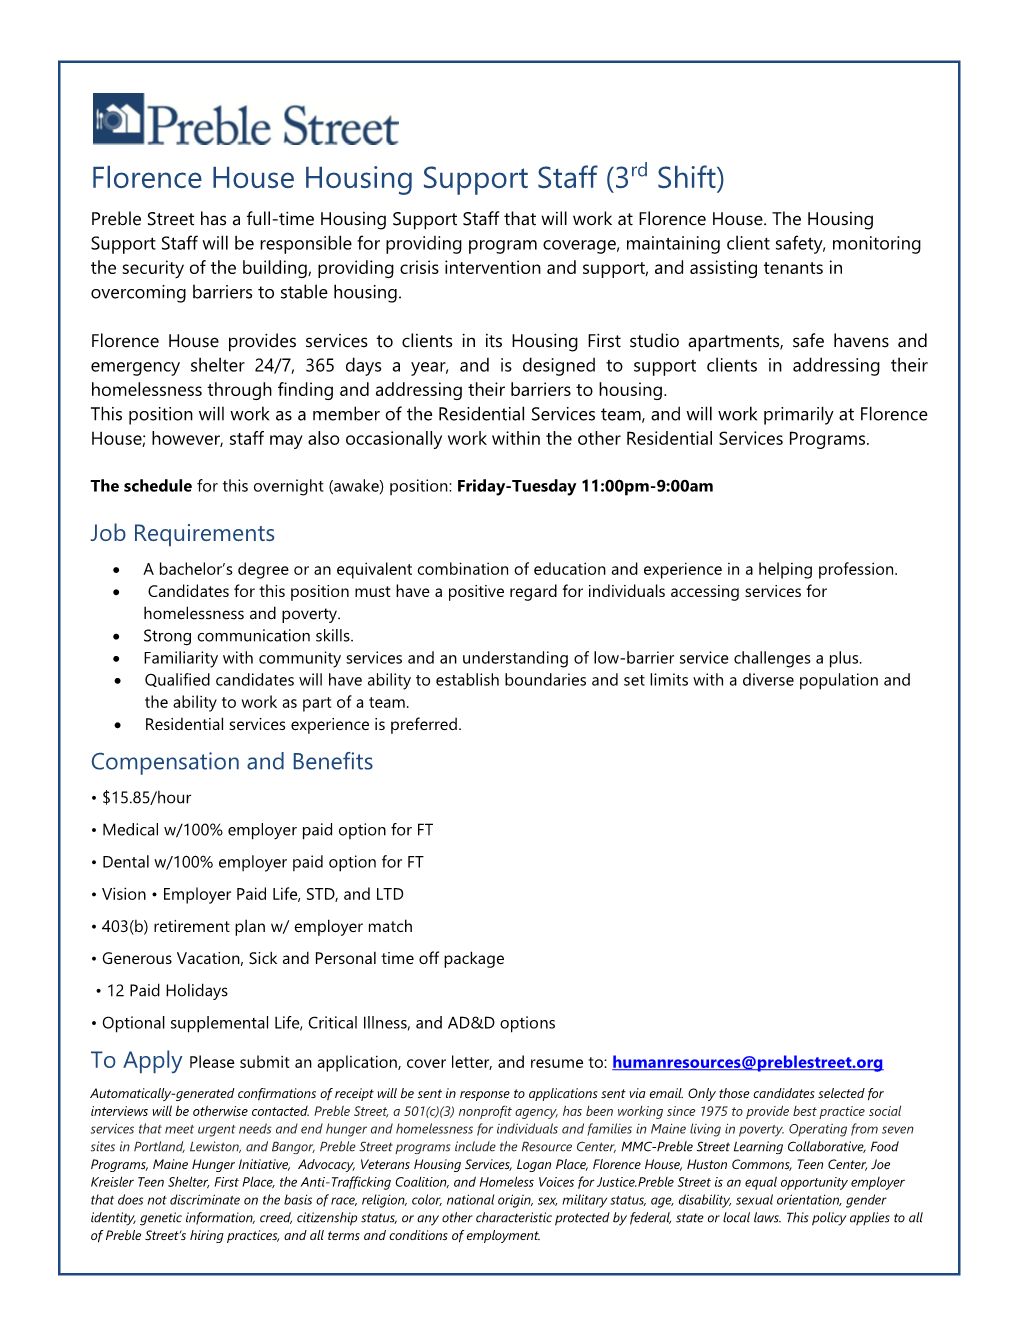 Florence House Housing Support Staff (3Rd Shift) Preble Street Has a Full-Time Housing Support Staff That Will Work at Florence House